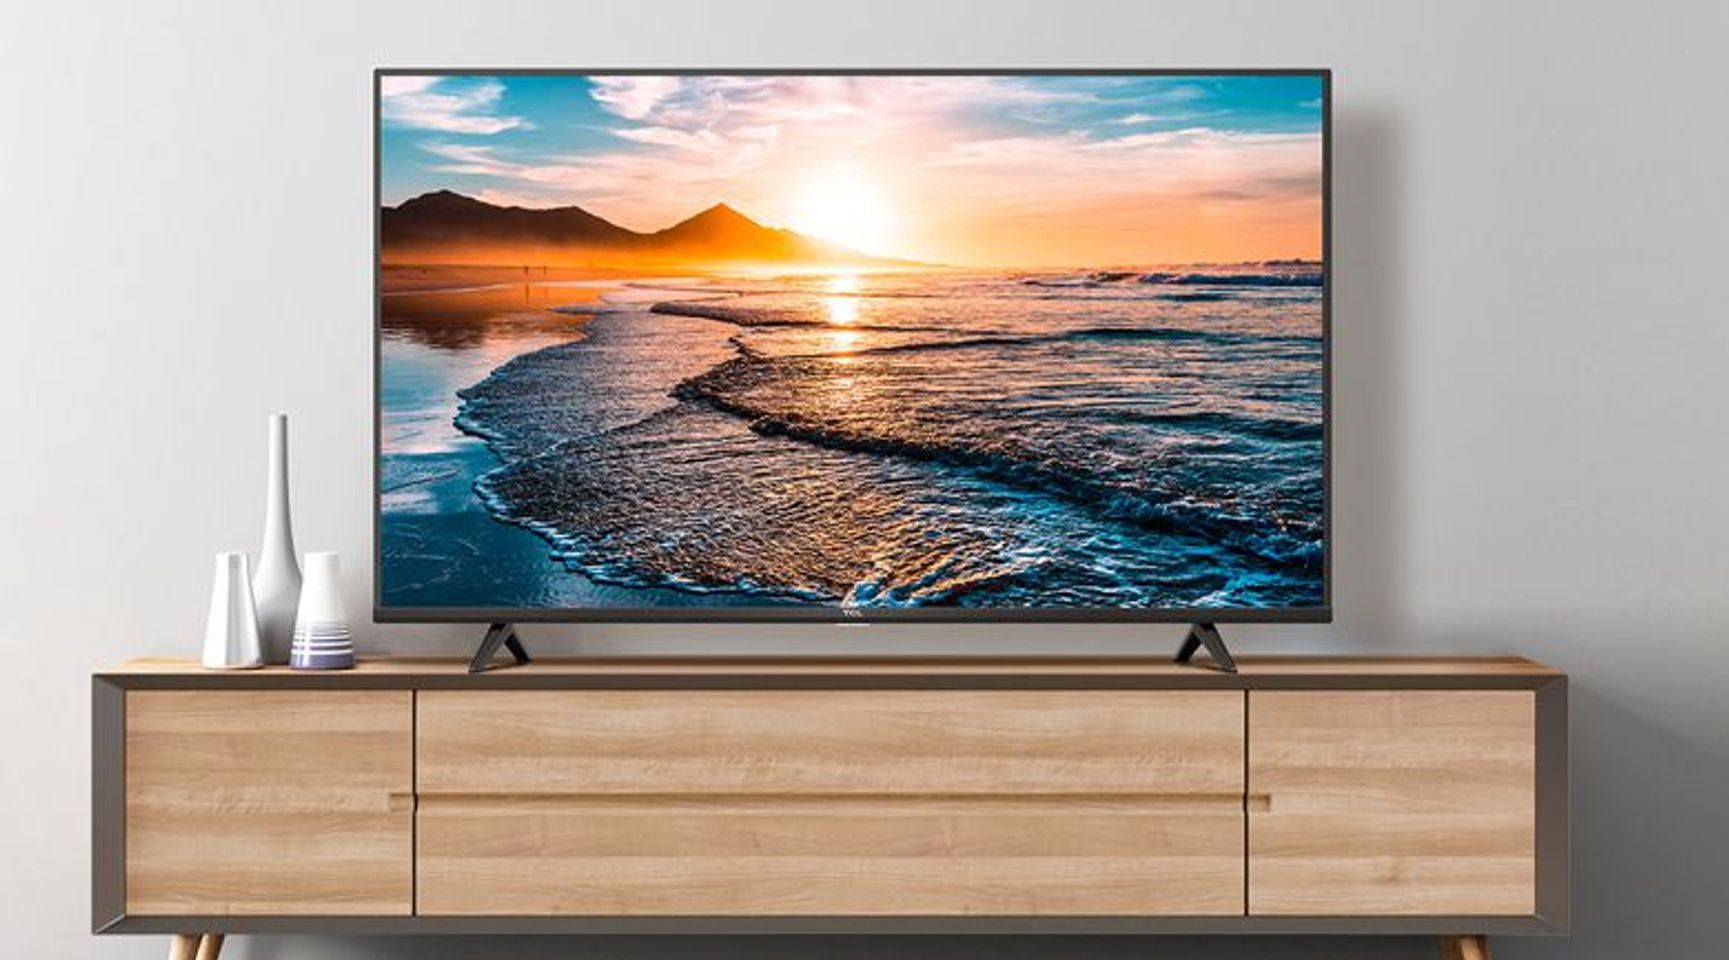 Android Tivi TCL 50P615 50 inch 4K 1